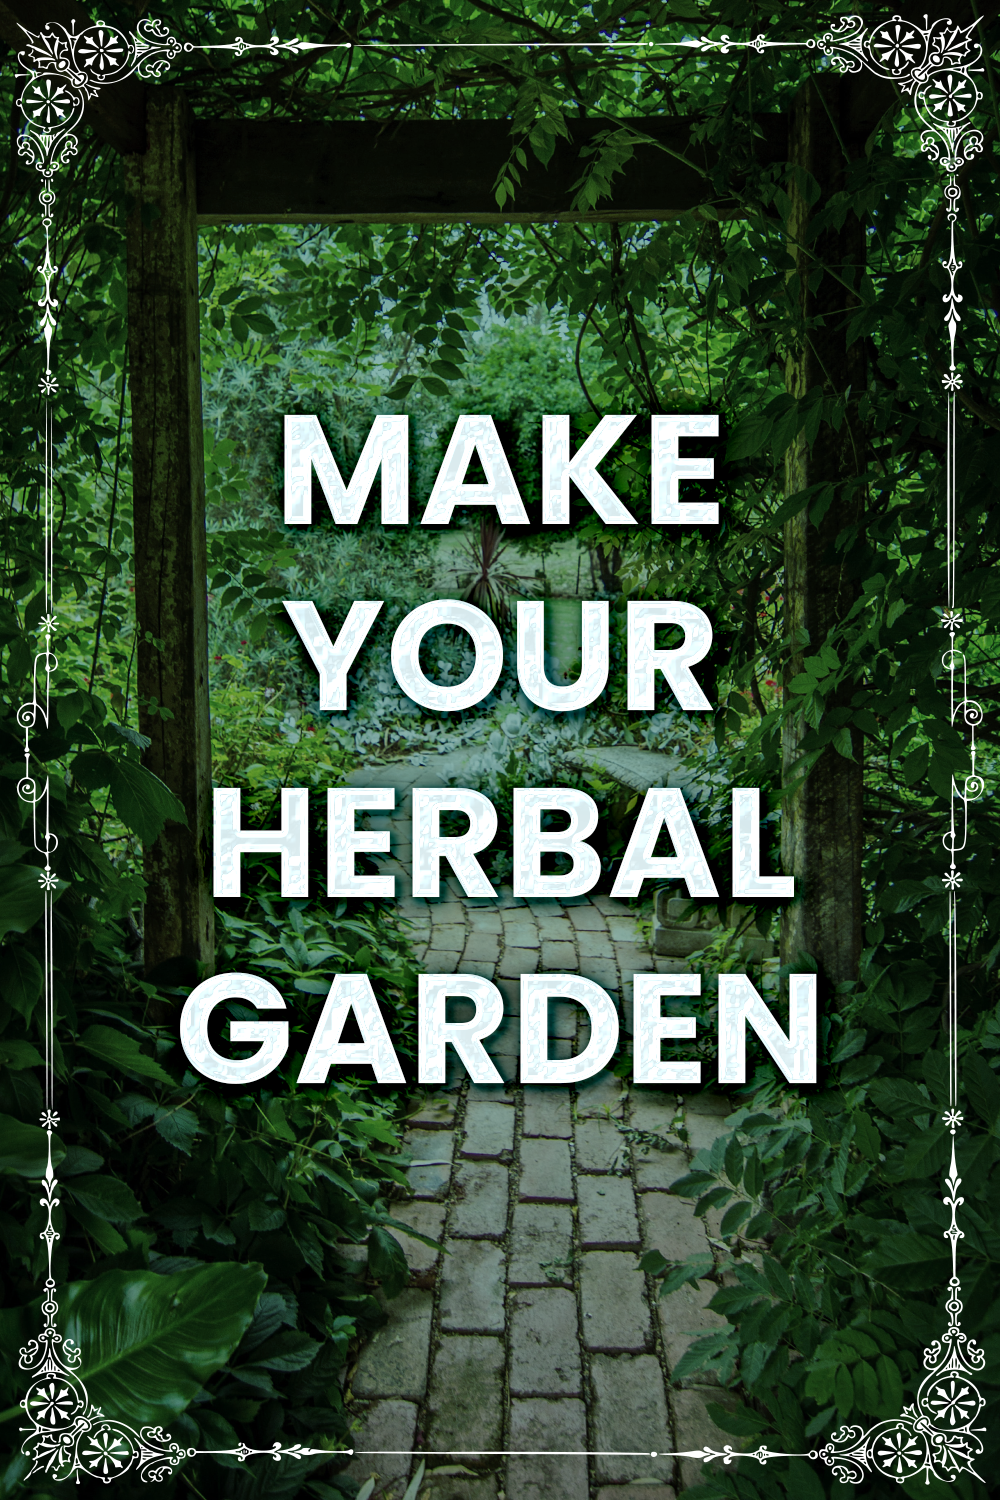 Importance of Making Small Herbal Garden In House